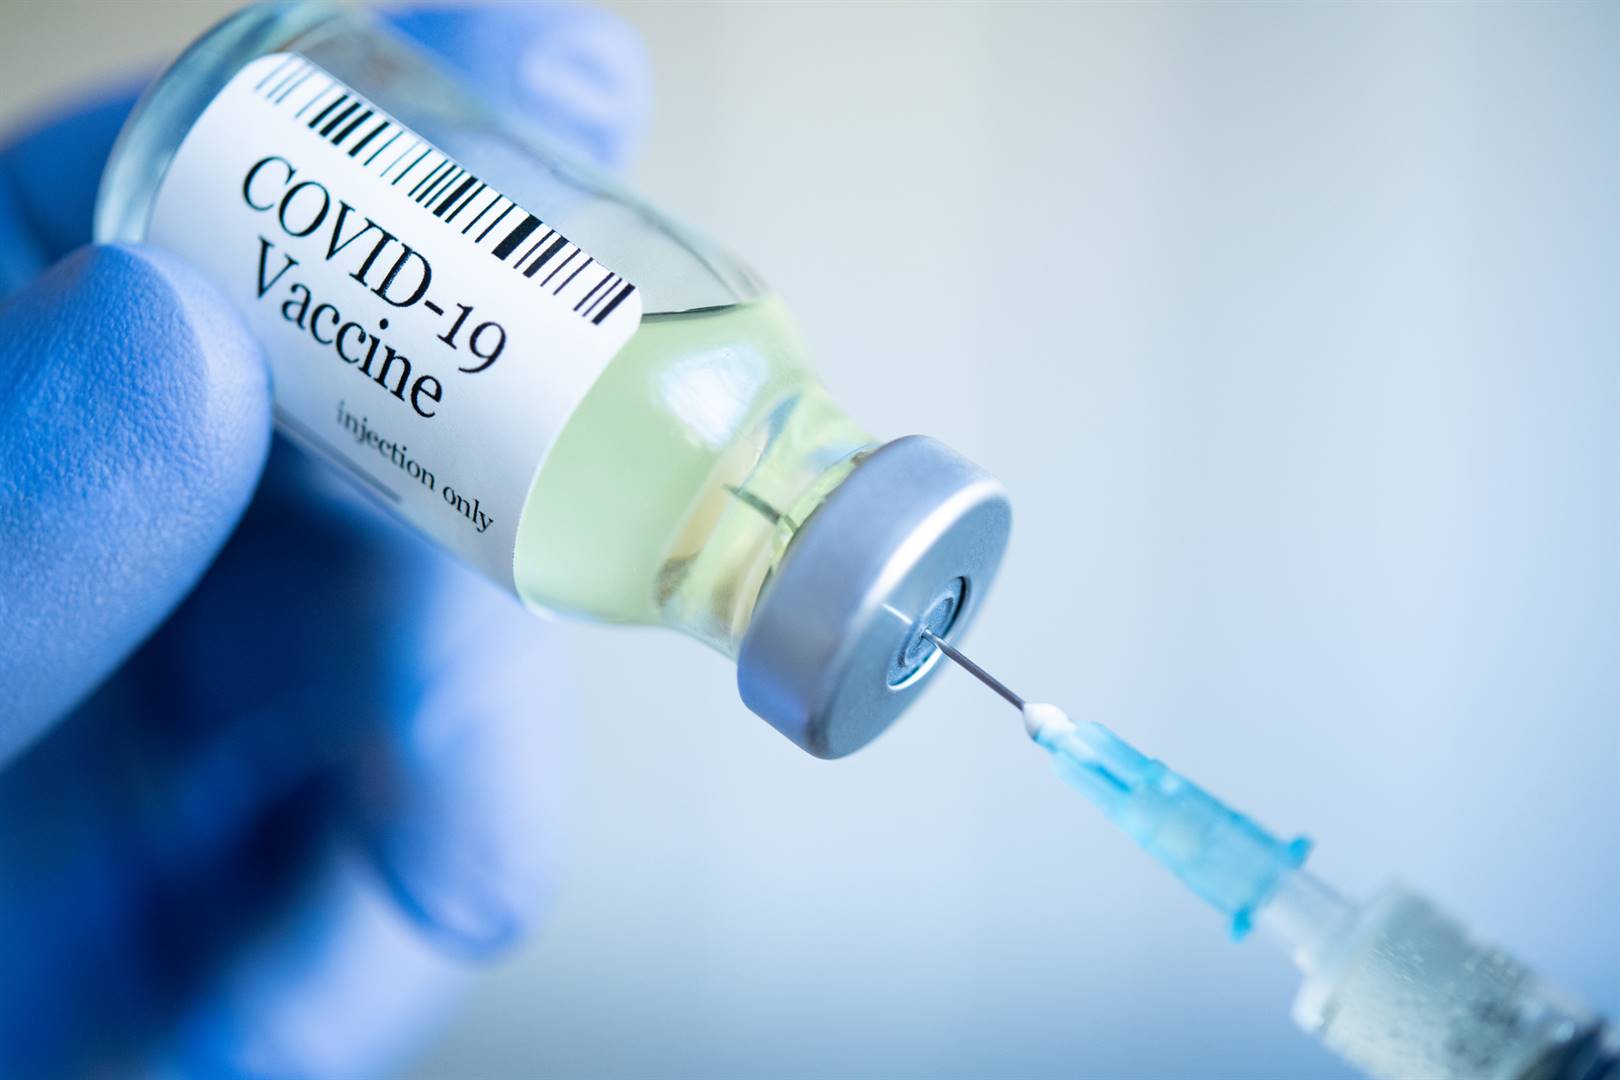 The US will ship millions of doses of the Covid-19 vaccine to South Africa and Nigeria. Photo: iStock